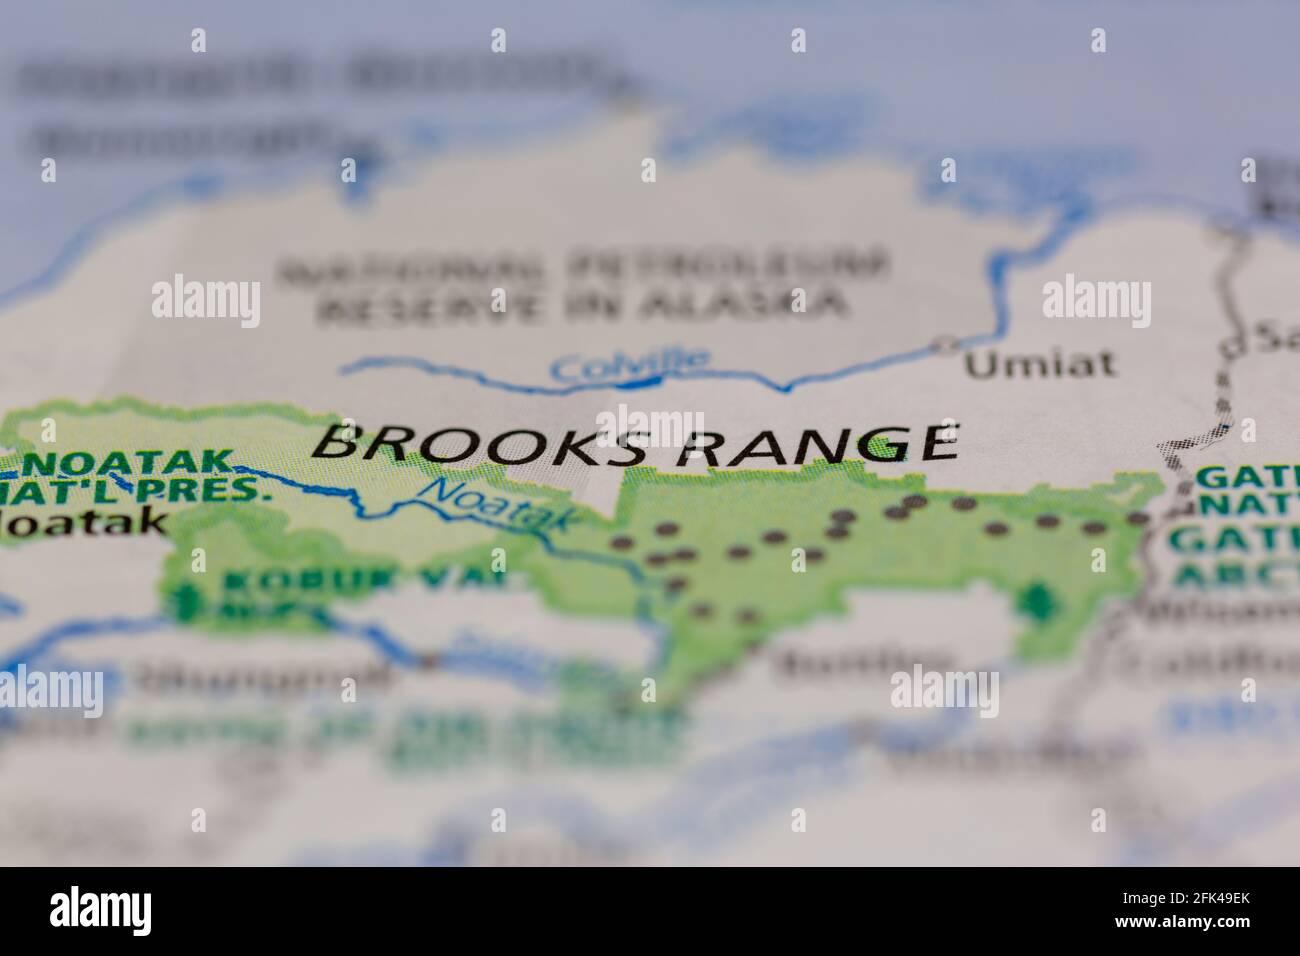 Brooks Range Alaska USA shown on a geography map or road map Stock Photo